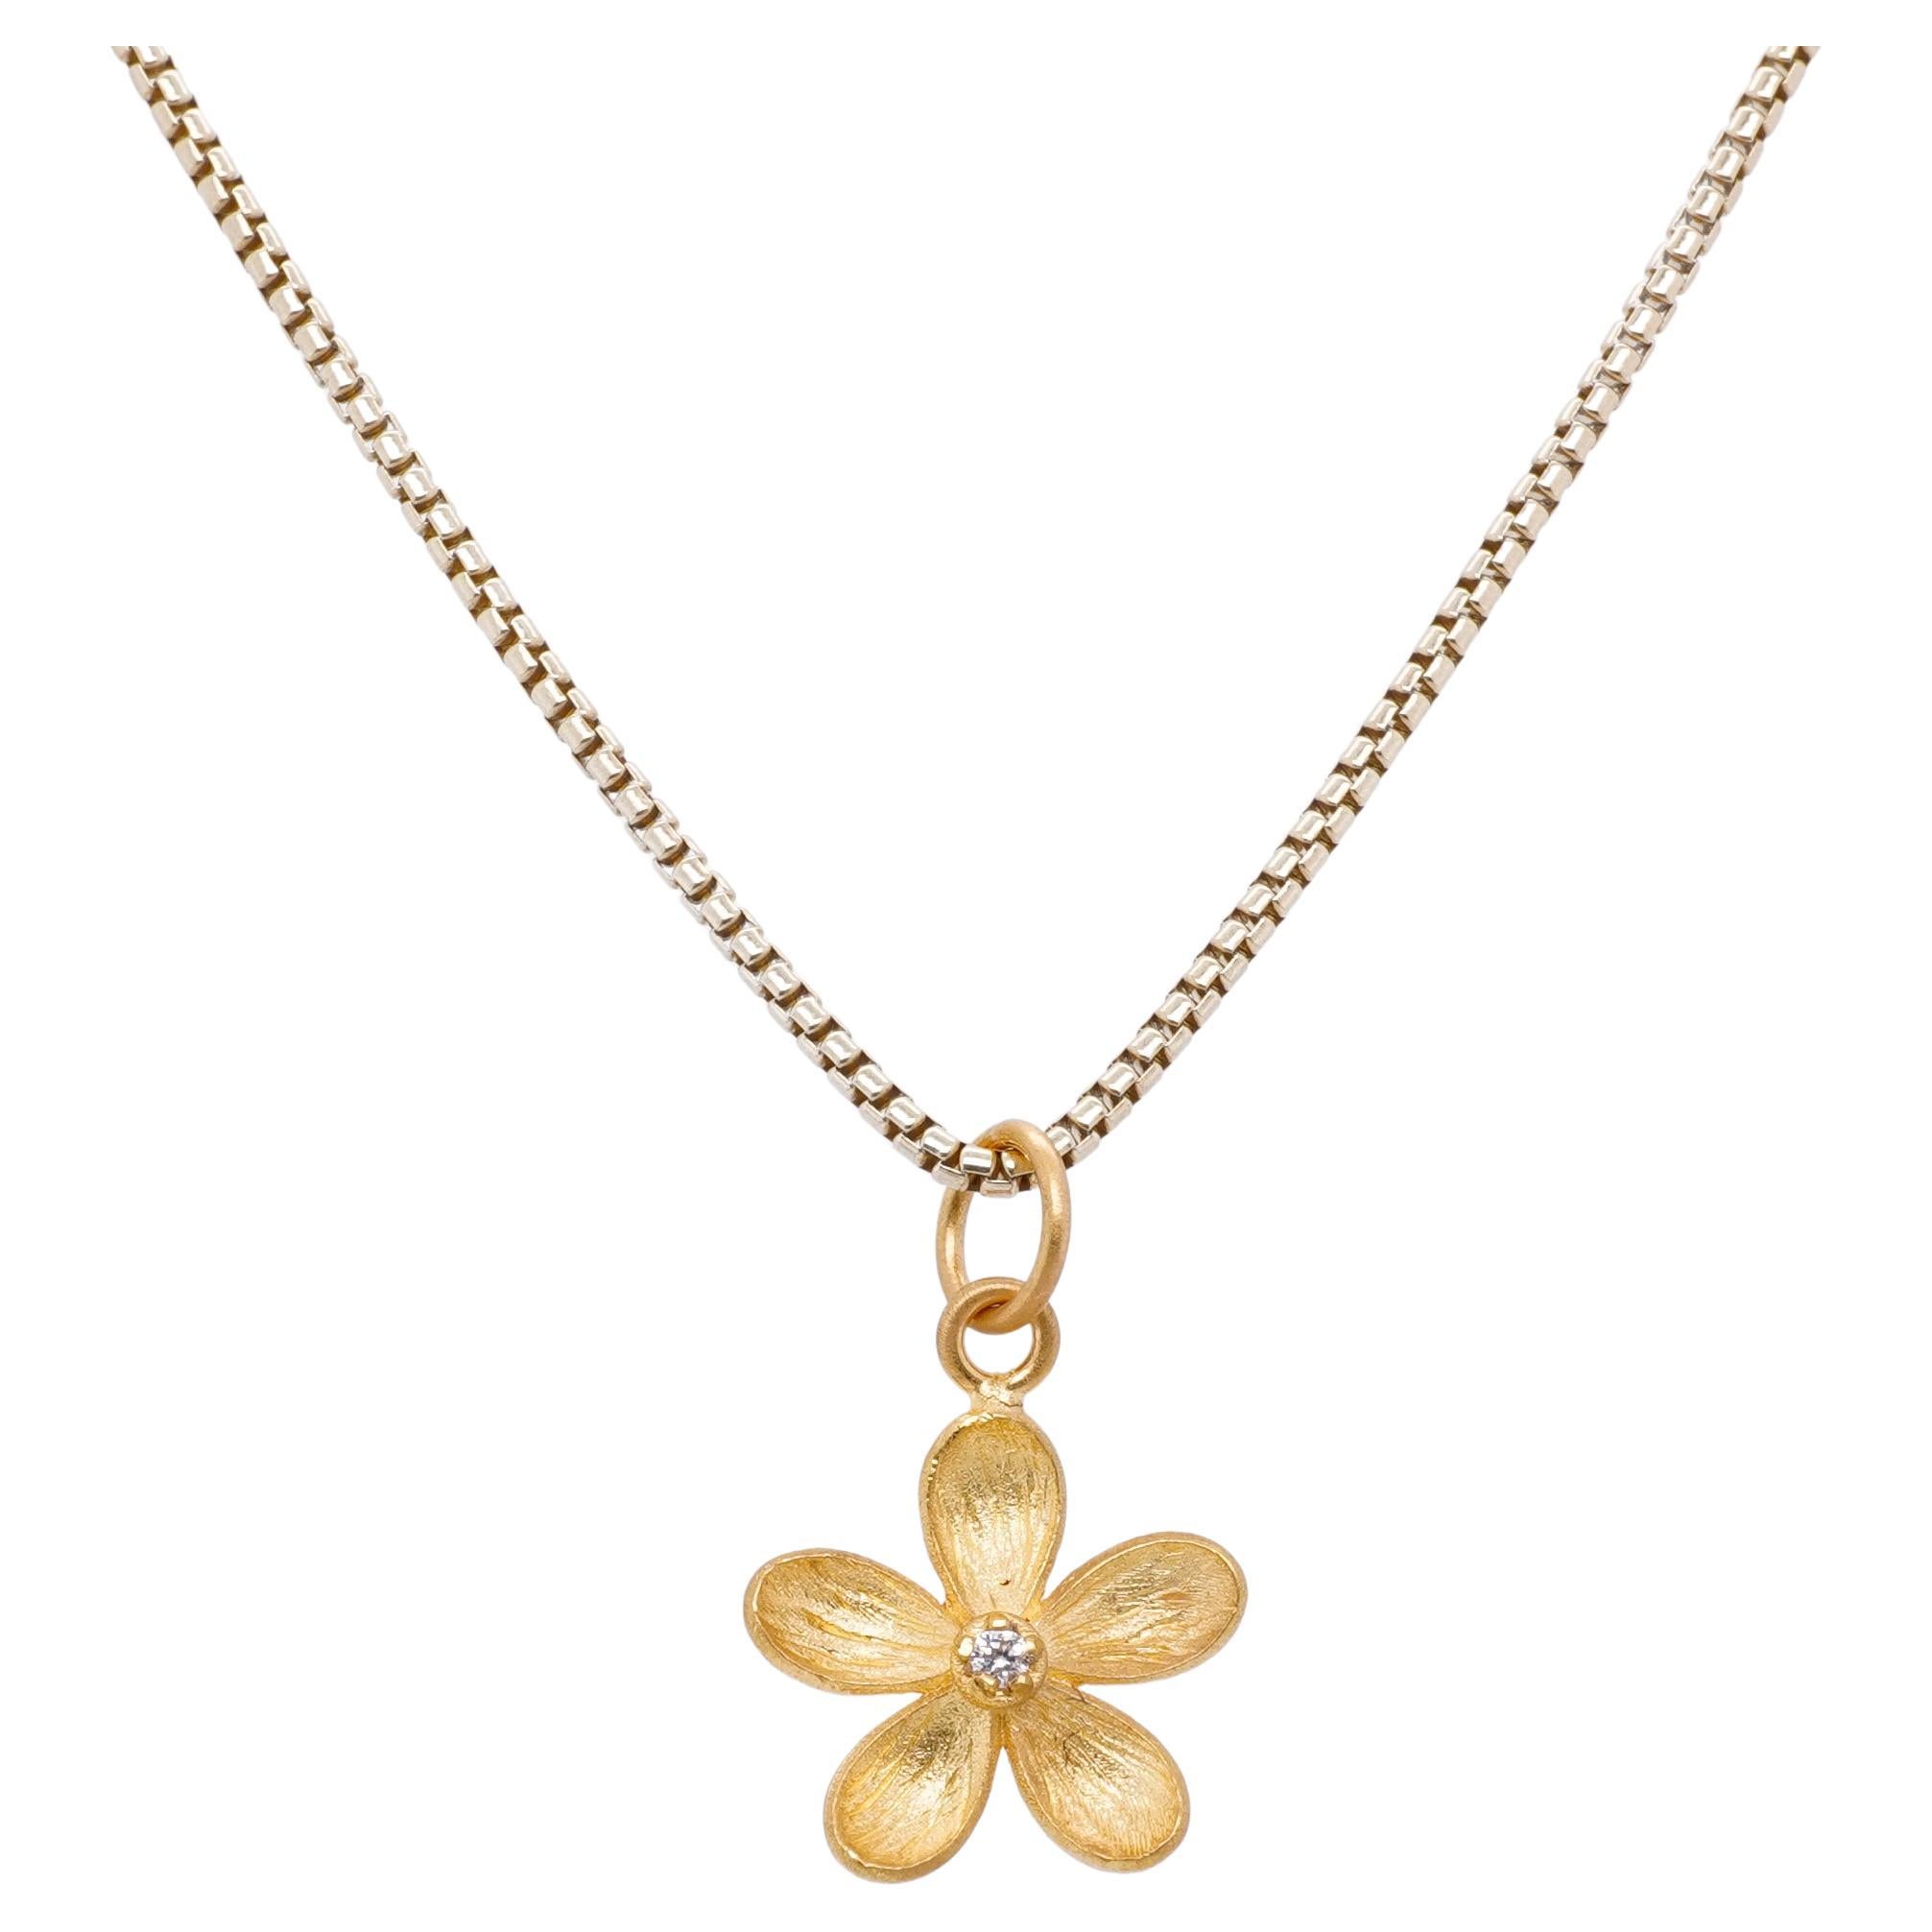 5 Petal Pentas Flower Charm Pendant Necklace with Center Diamond, 24kt Gold and Silver by Prehistoric Works of Istanbul, Turkey. Diamond - 0.01cts. These pendants pair well alone or with other coin pendants or with miniature pendants. Measures, 12mm